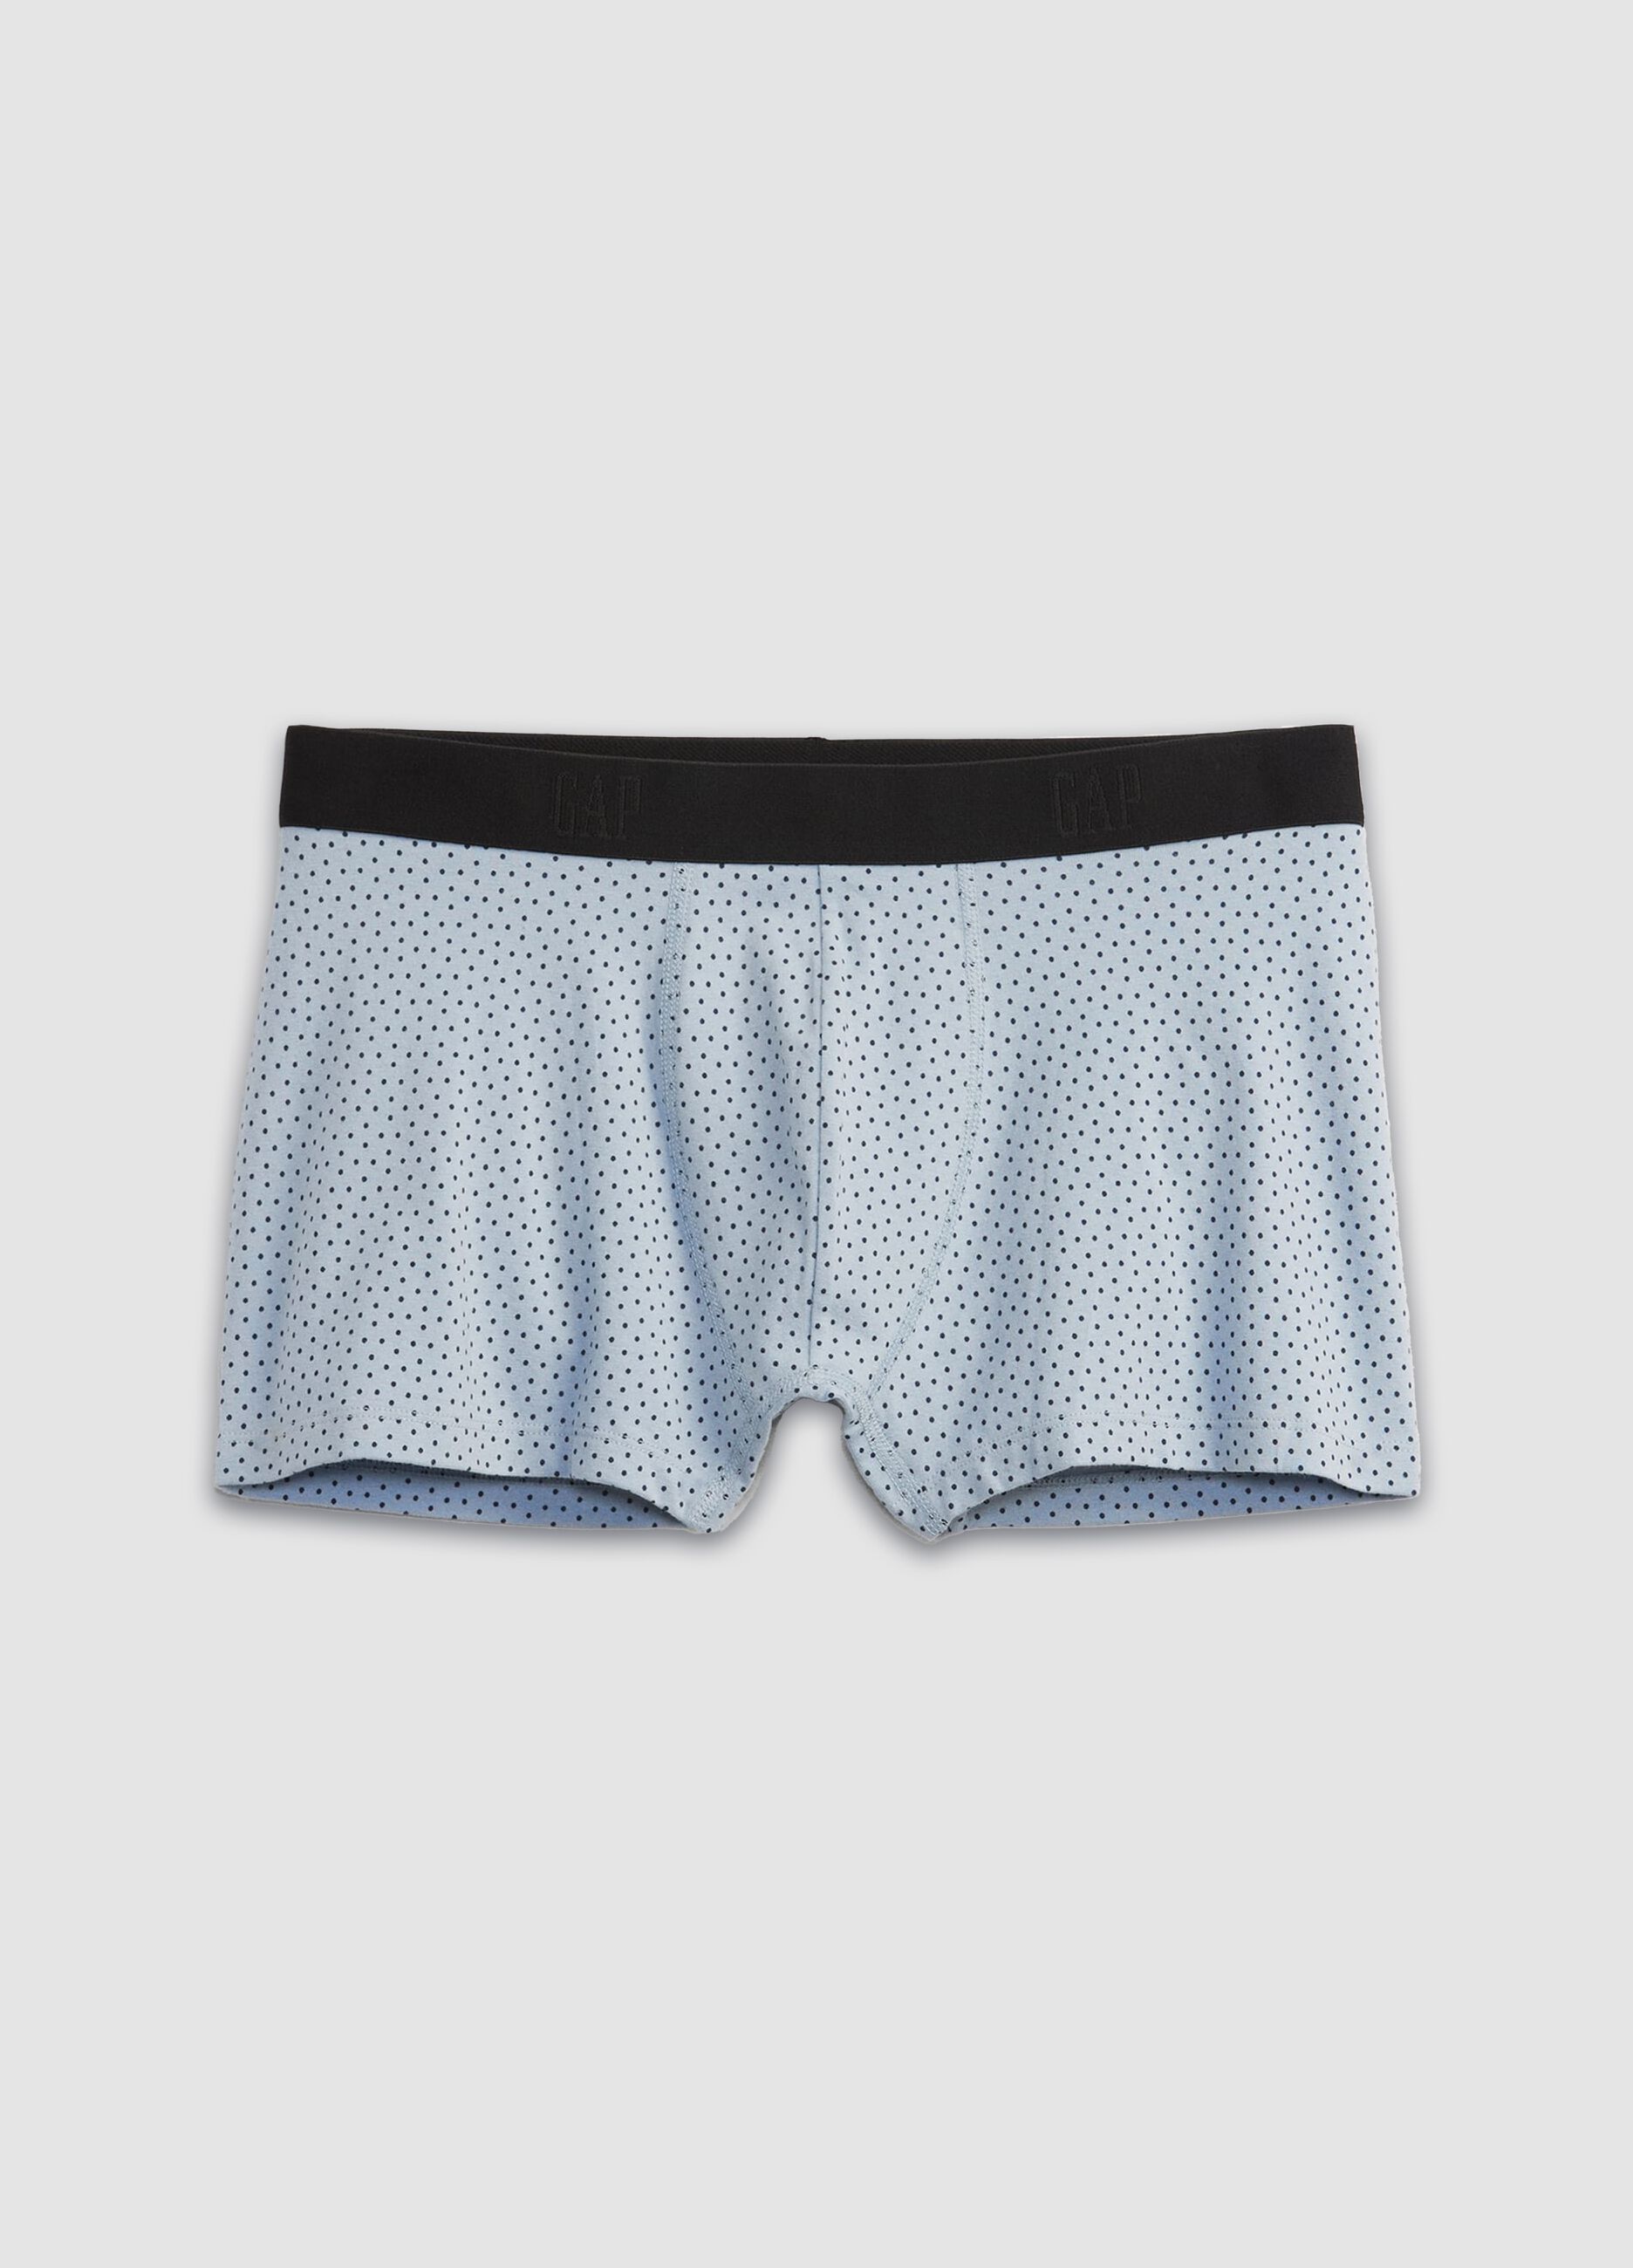 Boxer briefs with micro polka dot pattern.